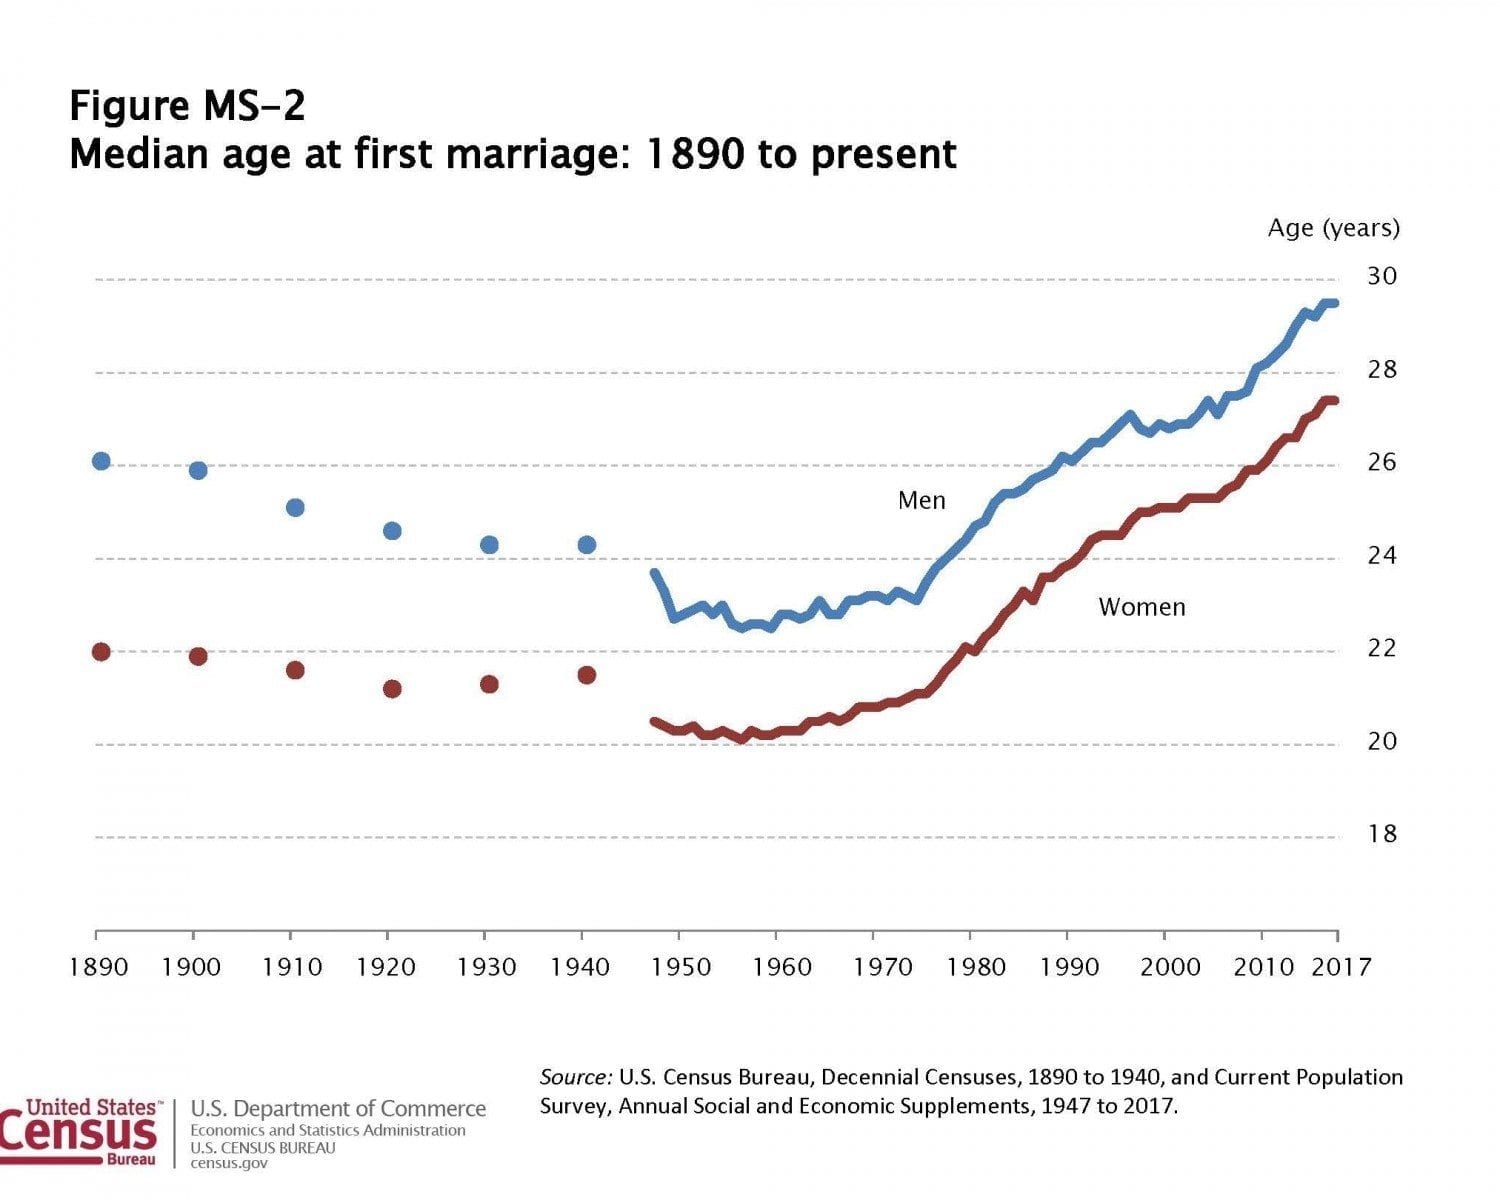 Median age at first marriage